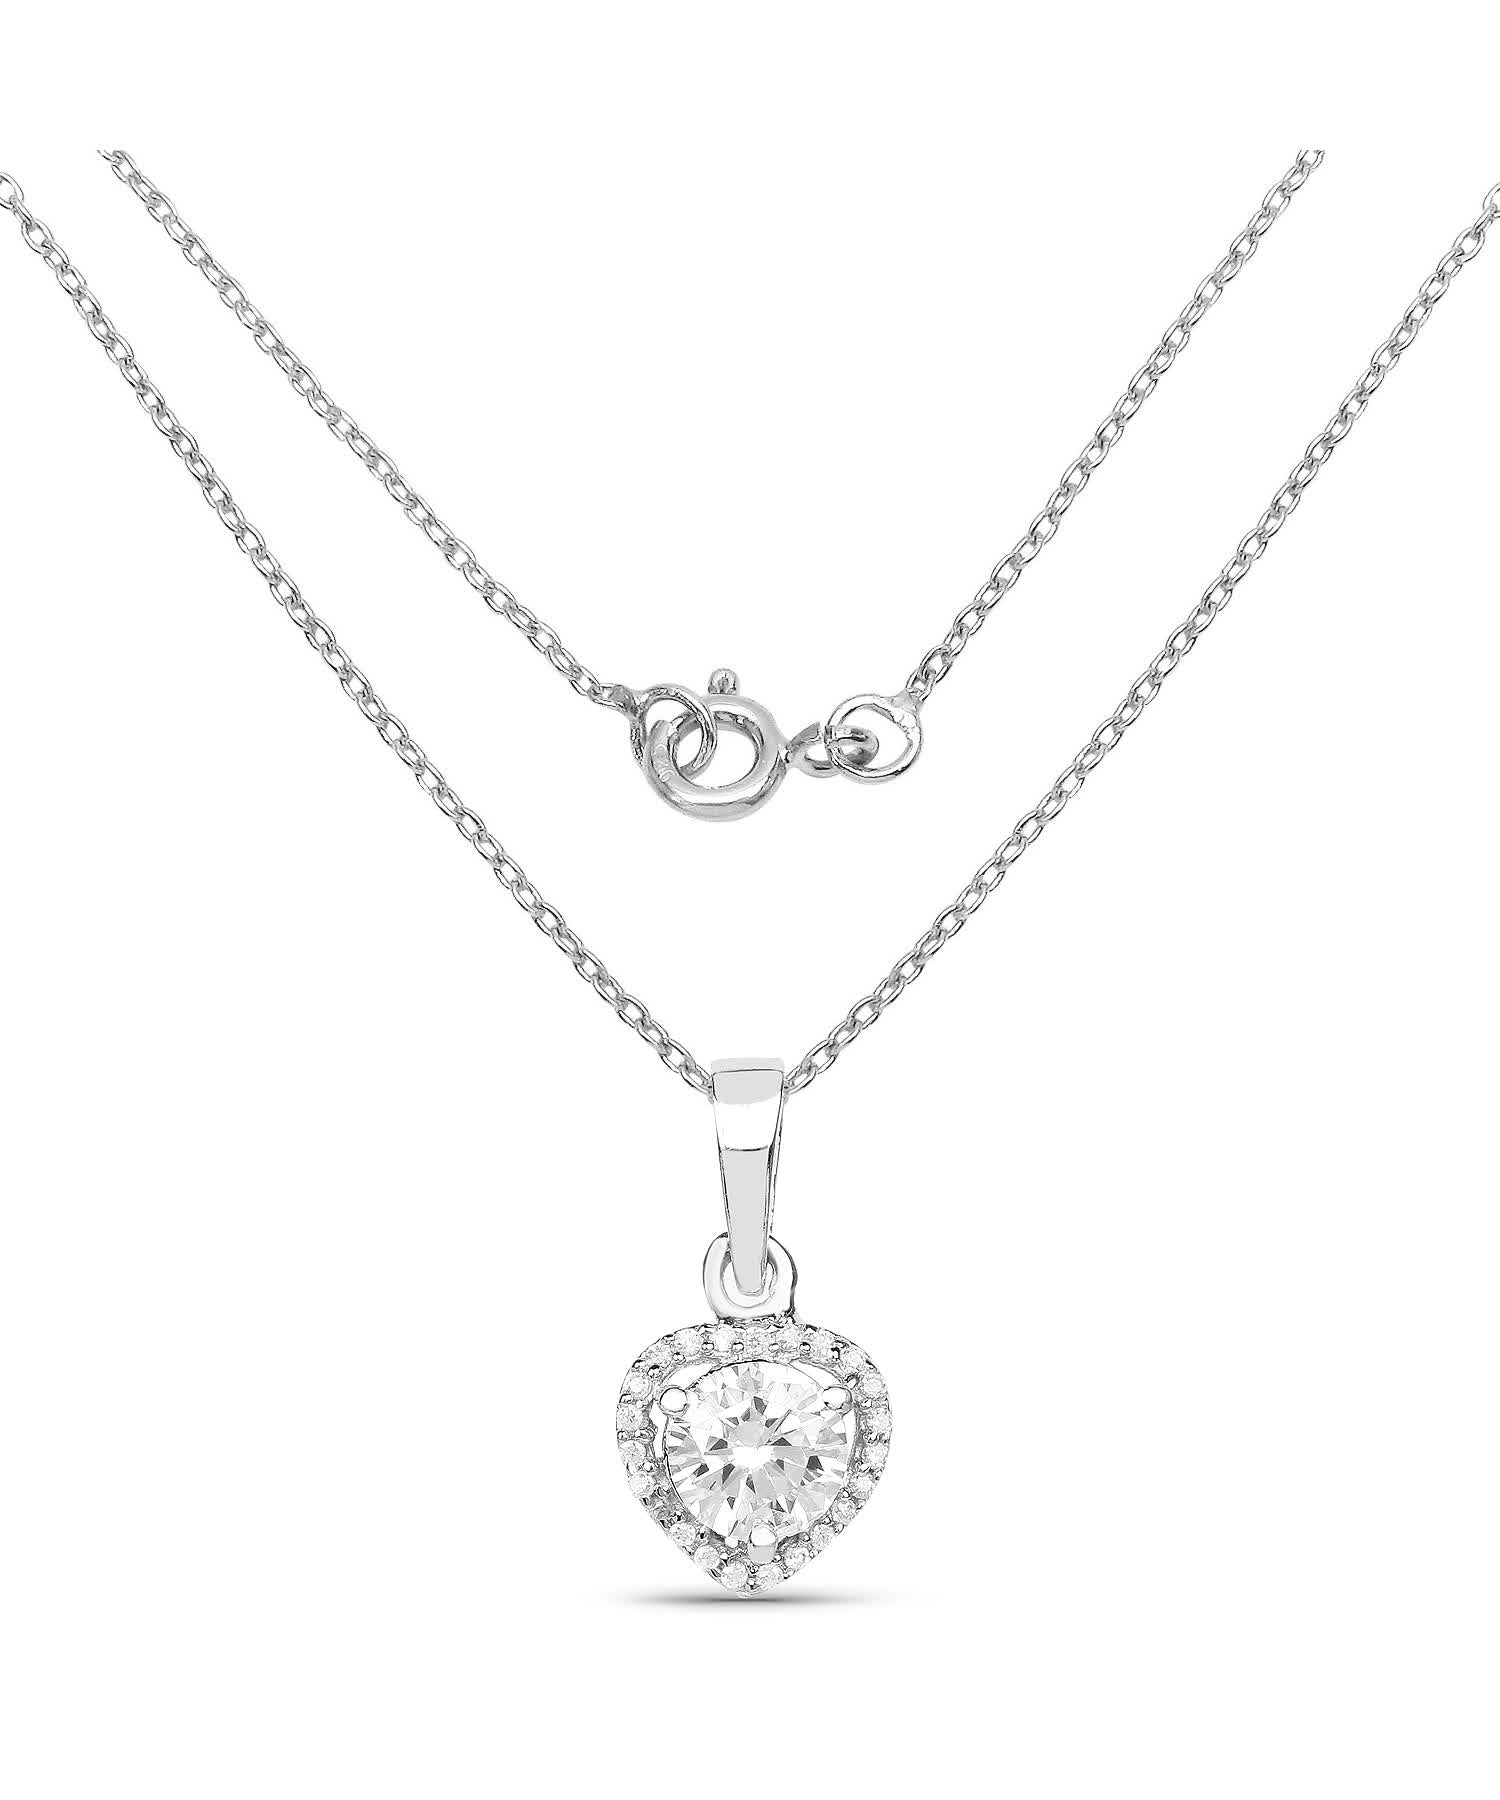 Created Cubic Zirconia Rhodium Plated 925 Sterling Silver Heart Pendant With Chain View 2